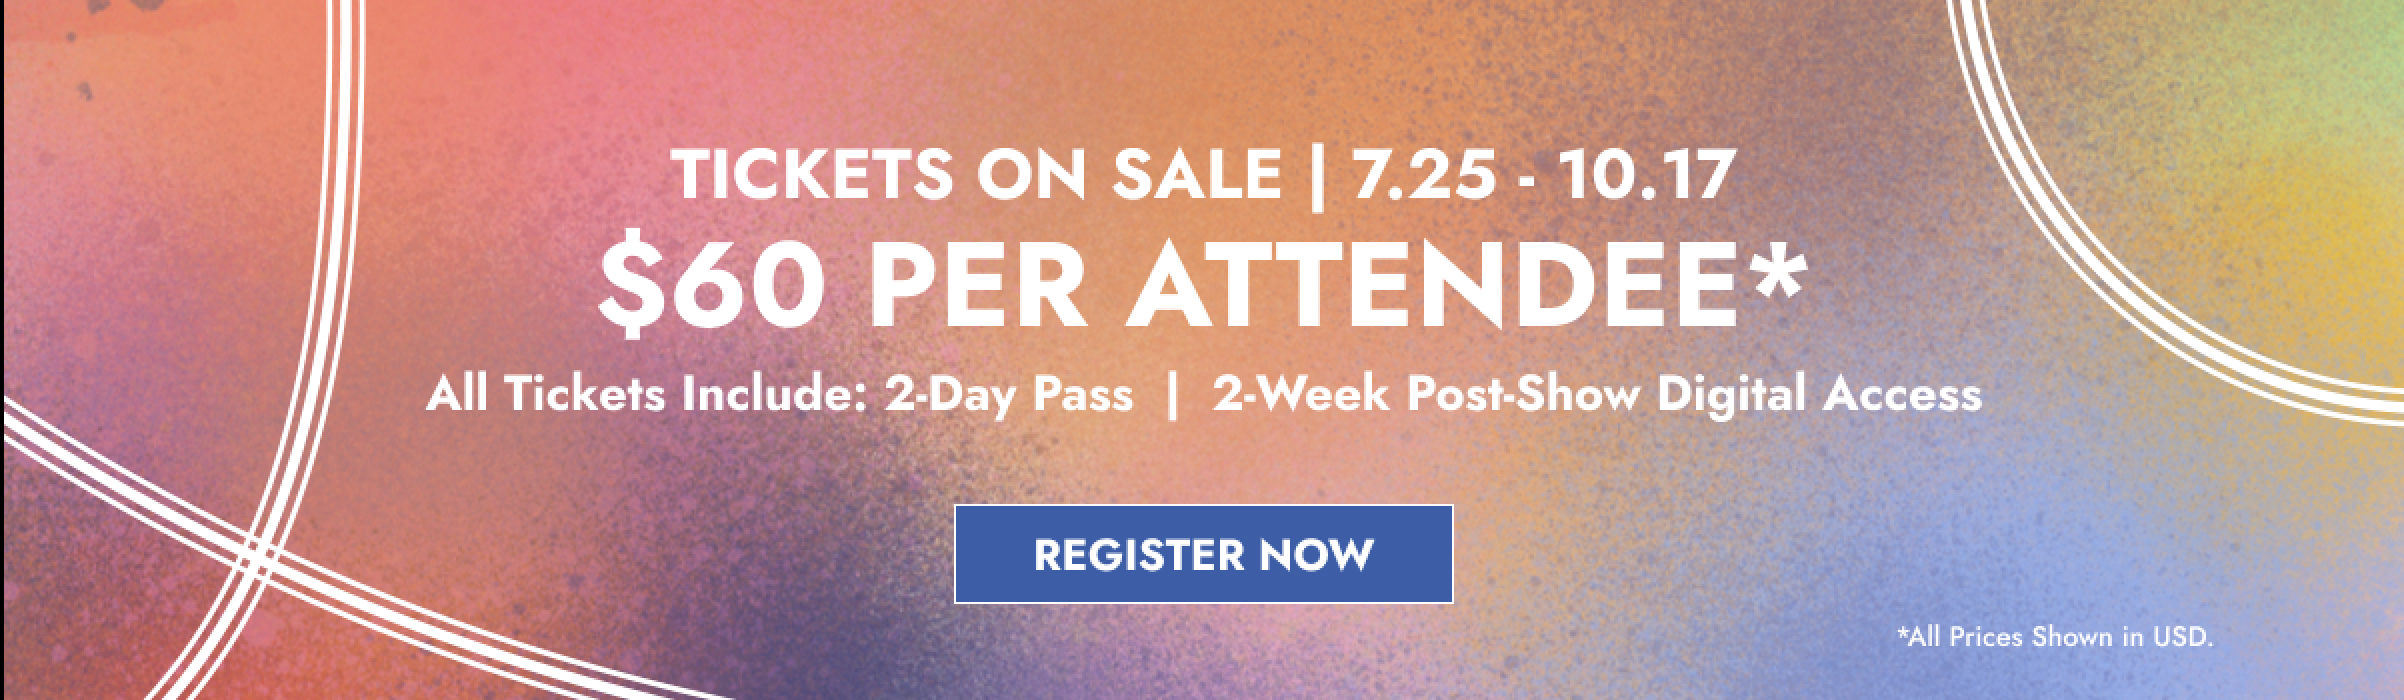 Get early bird pricing on tickets from July 10th through July 24th, 2022 for only $50 per attendee. All tickets include a two day pass and two weeks of post-show digital access. All prices are in USD. Click here to buy tickets now!